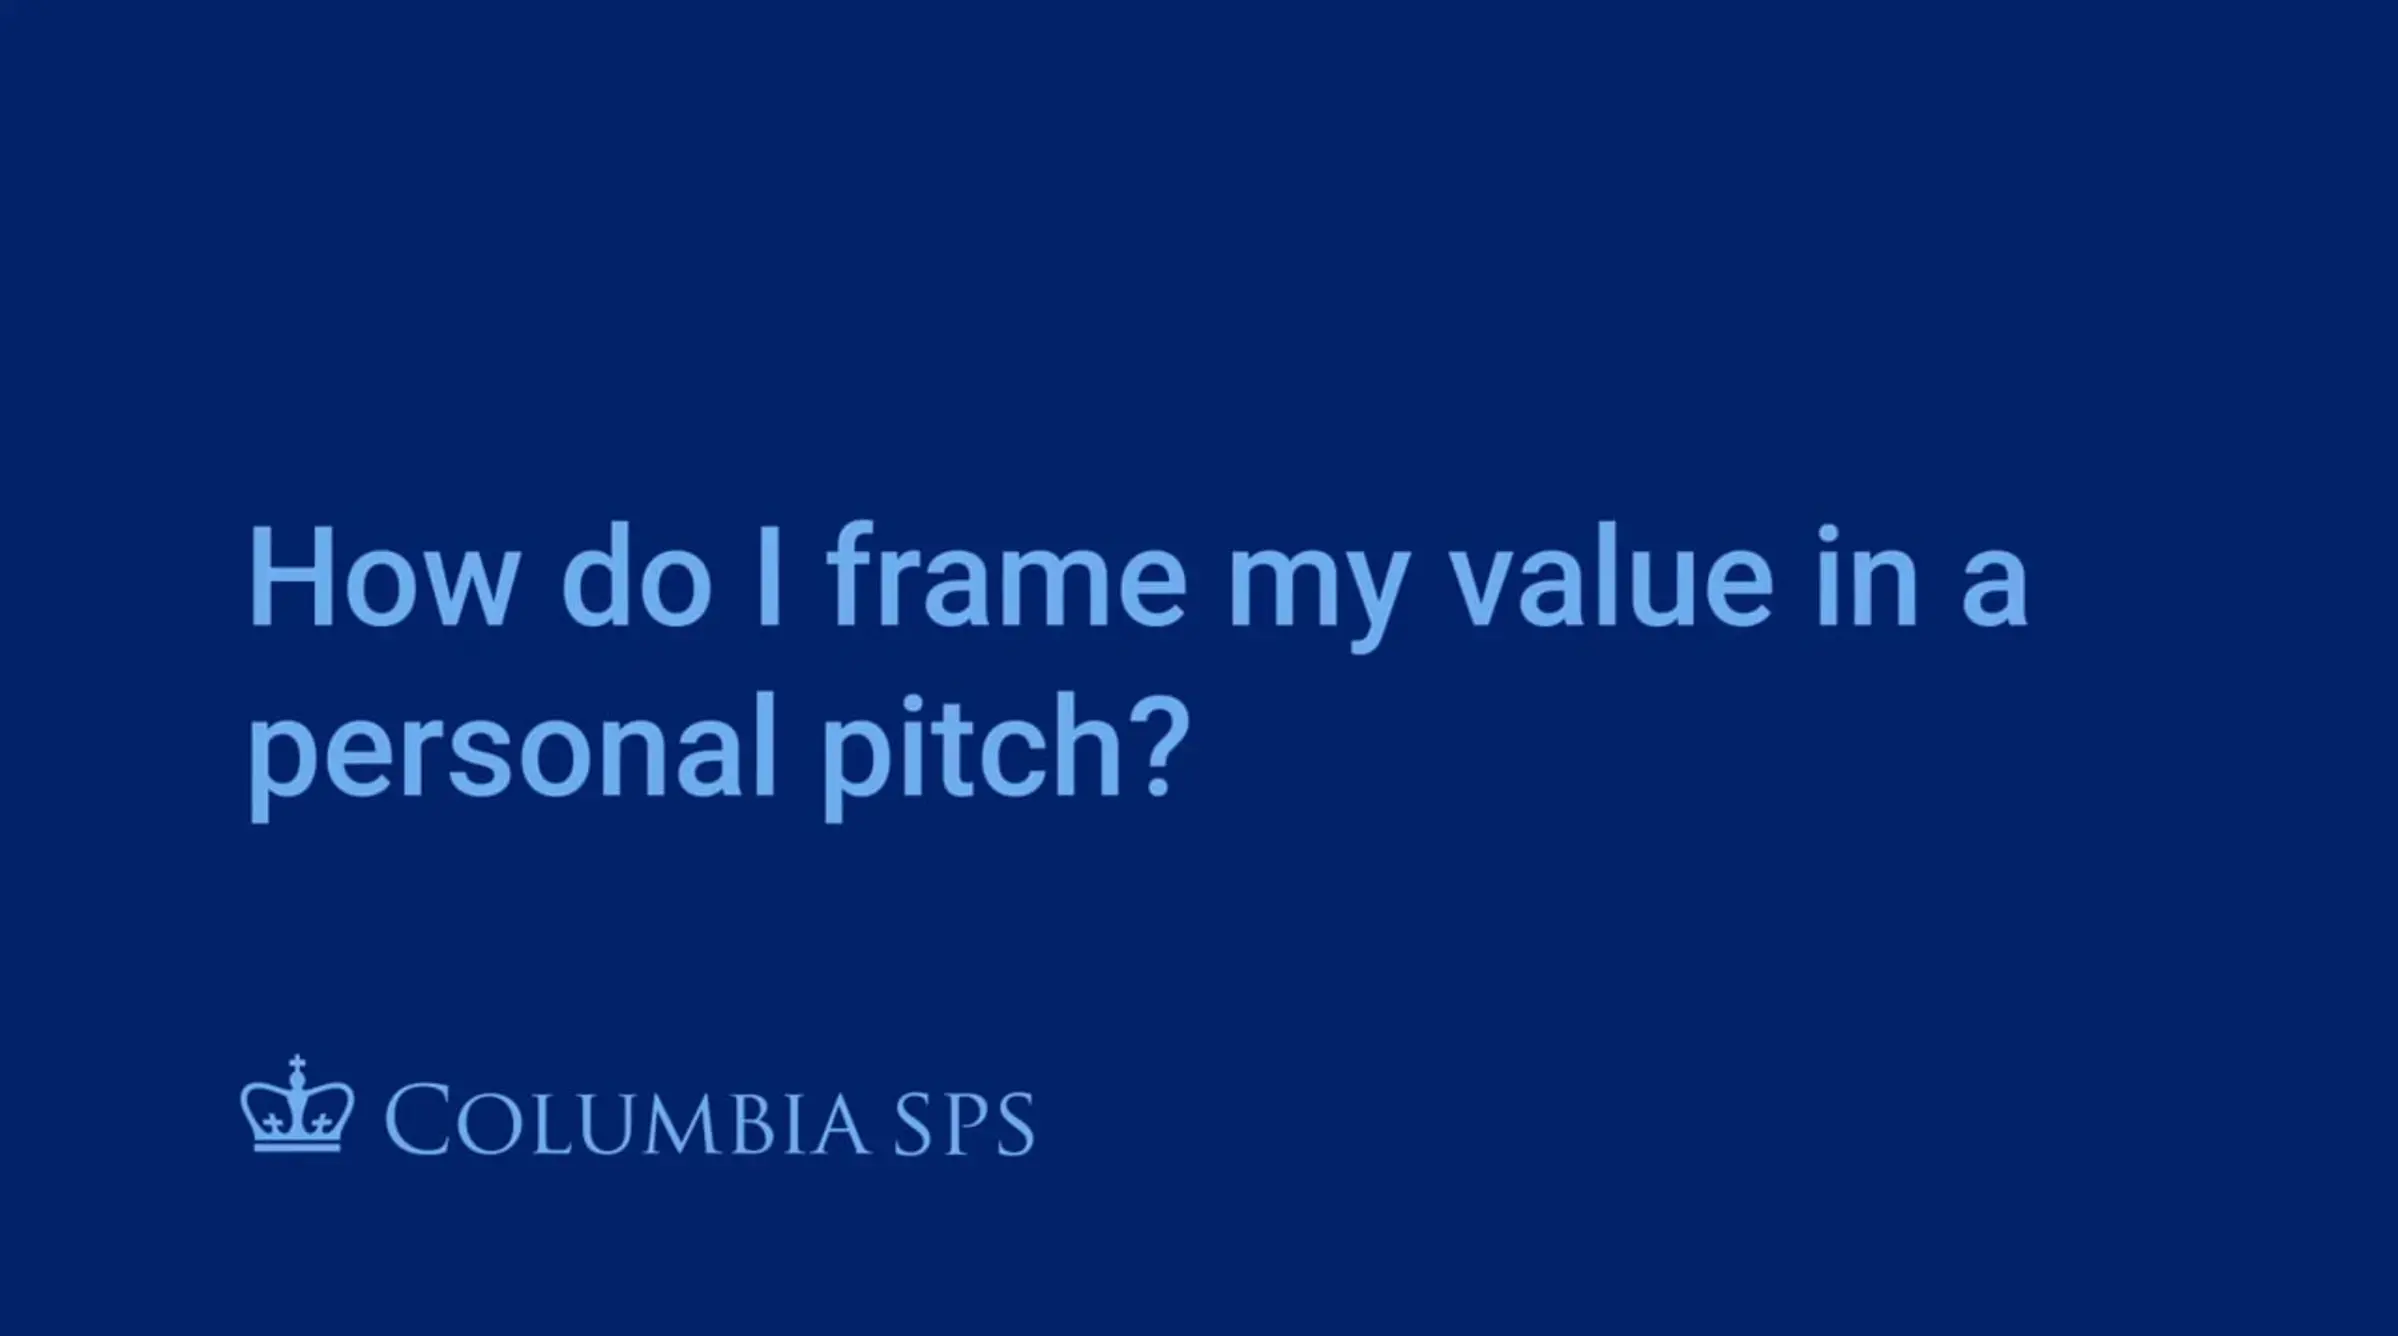 How Do I Frame My Value in a Personal Pitch?